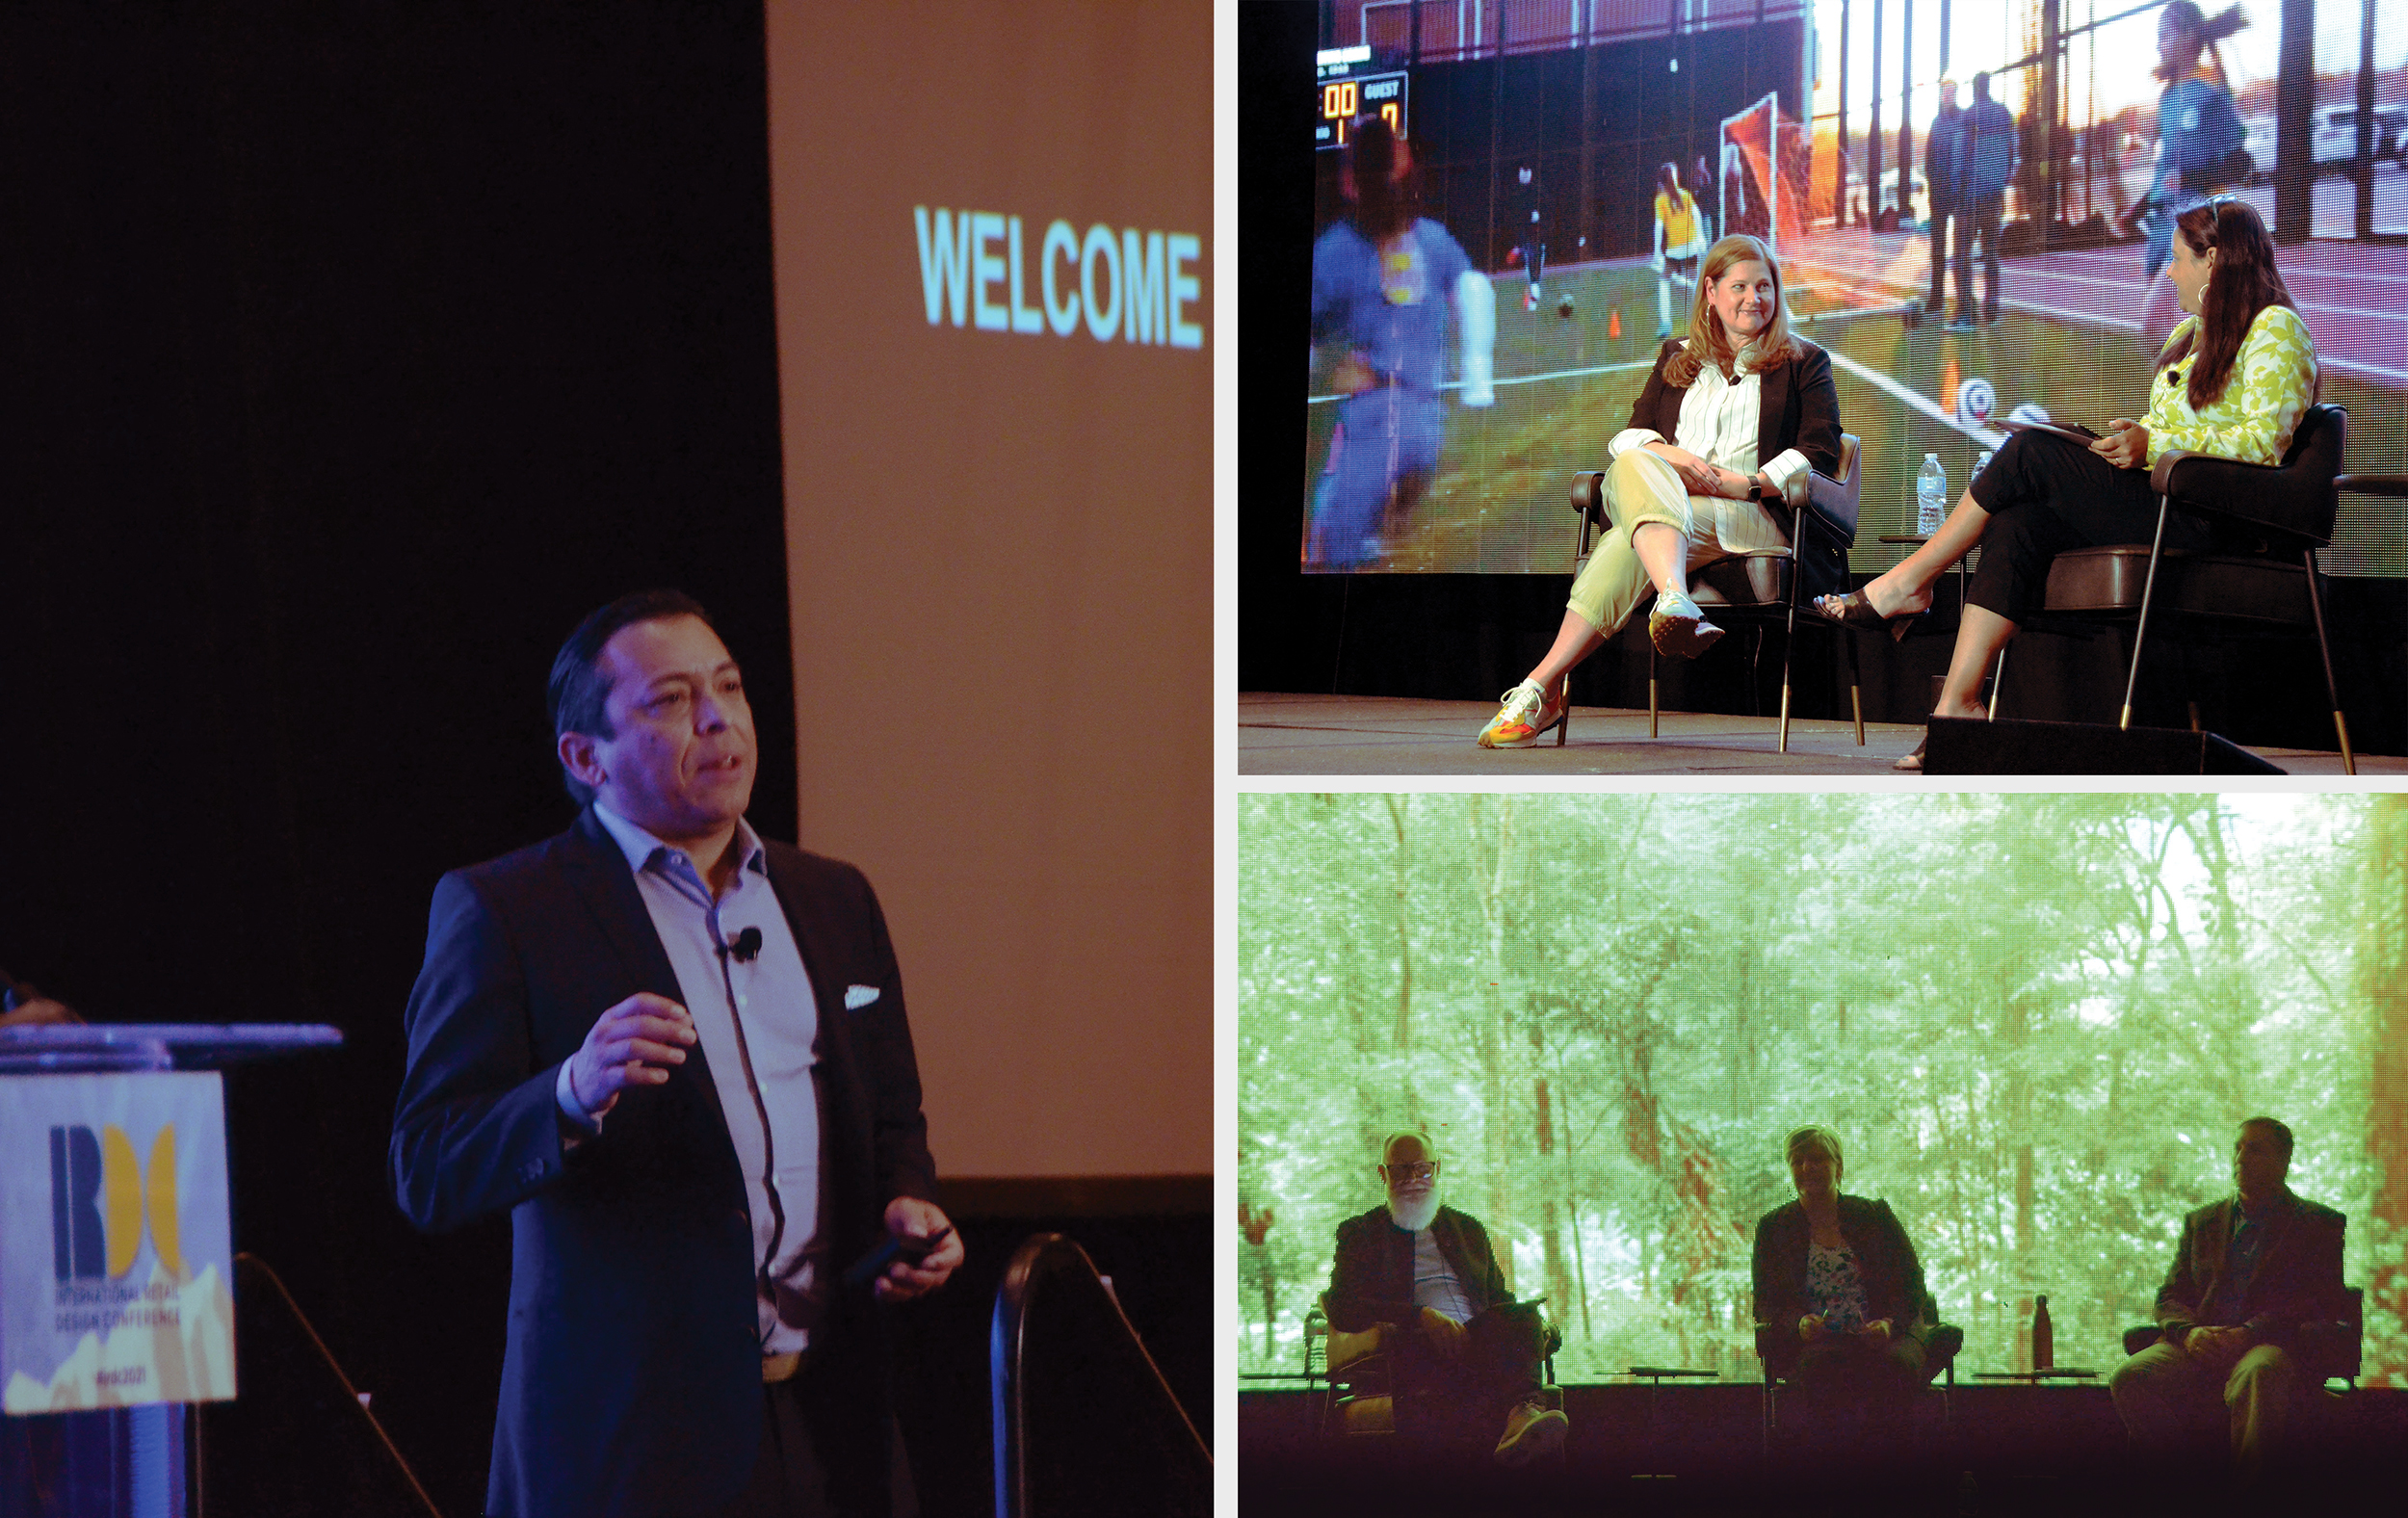  (LEFT) Brian Solis opens IRDC with a compelling keynote; (ABOVE) VMSD’s Jennifer Acevedo sits down for a fireside chat with Dick’s Sporting Goods’ Toni Roeller; (BOTTOM) Bevan Bloemendaal led a panel discussion on designing healthy spaces.